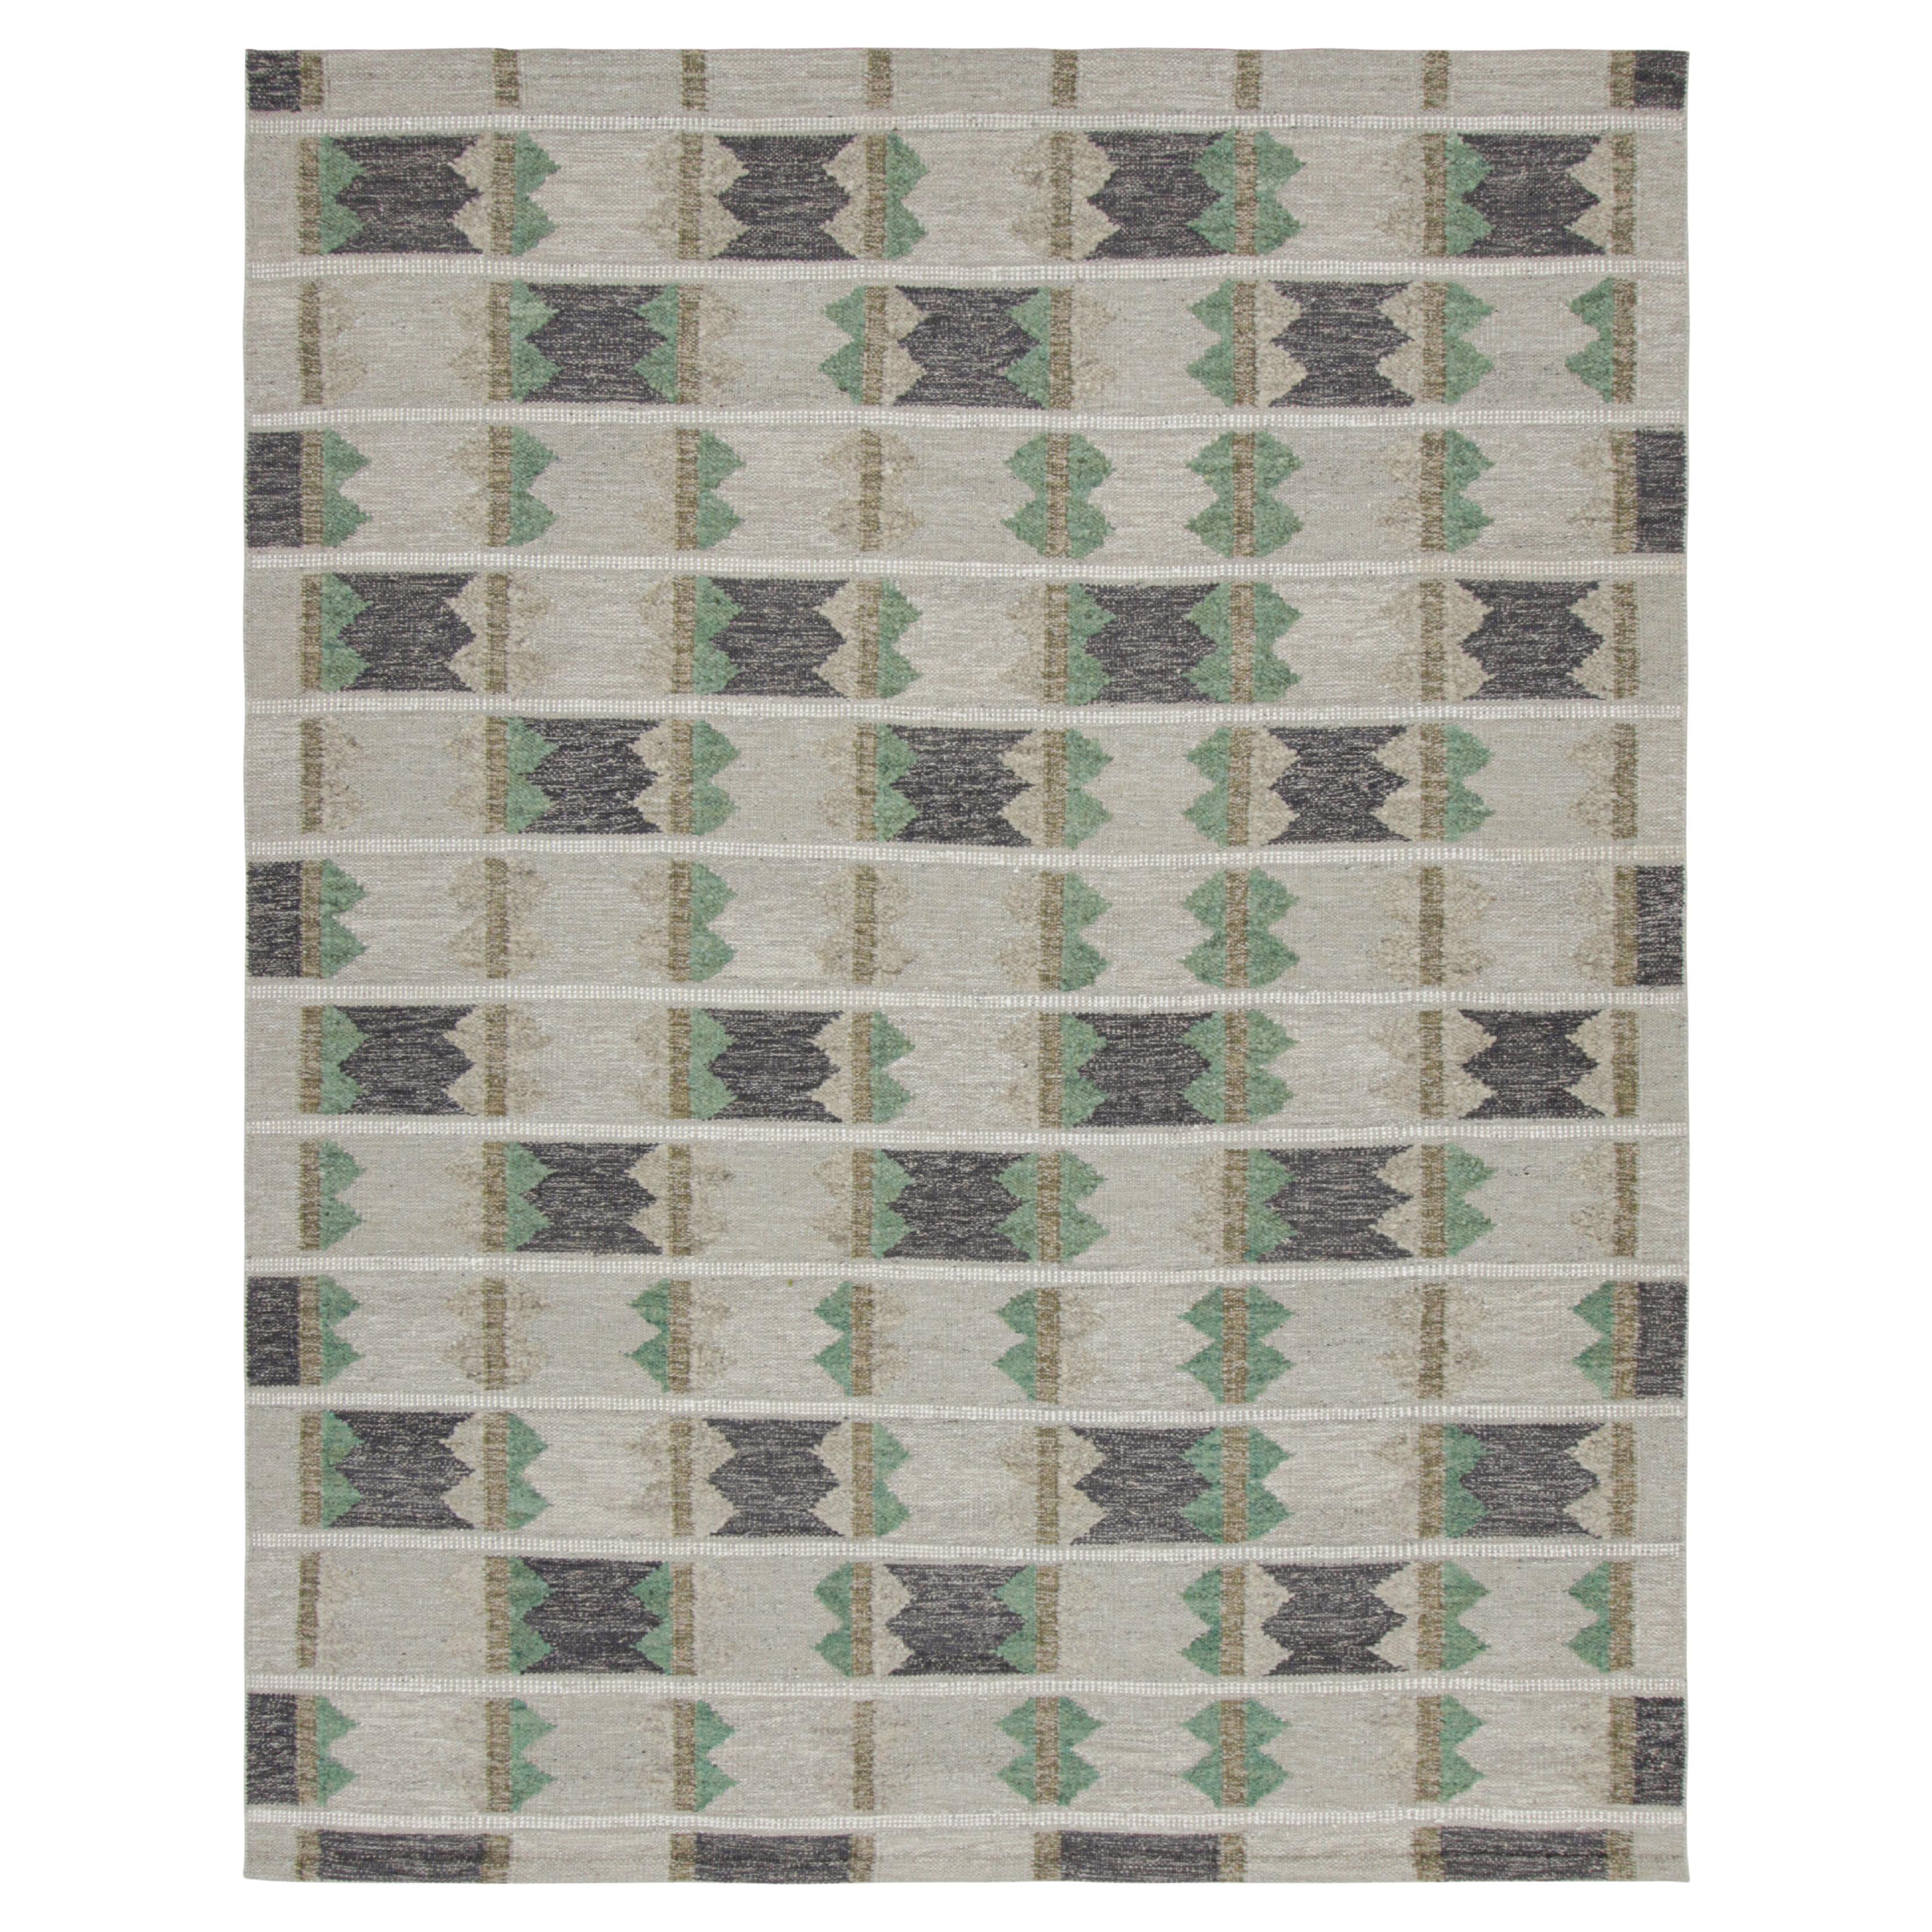 Rug & Kilim’s Scandinavian Style Rug with Geometric Patterns in Tones of Green